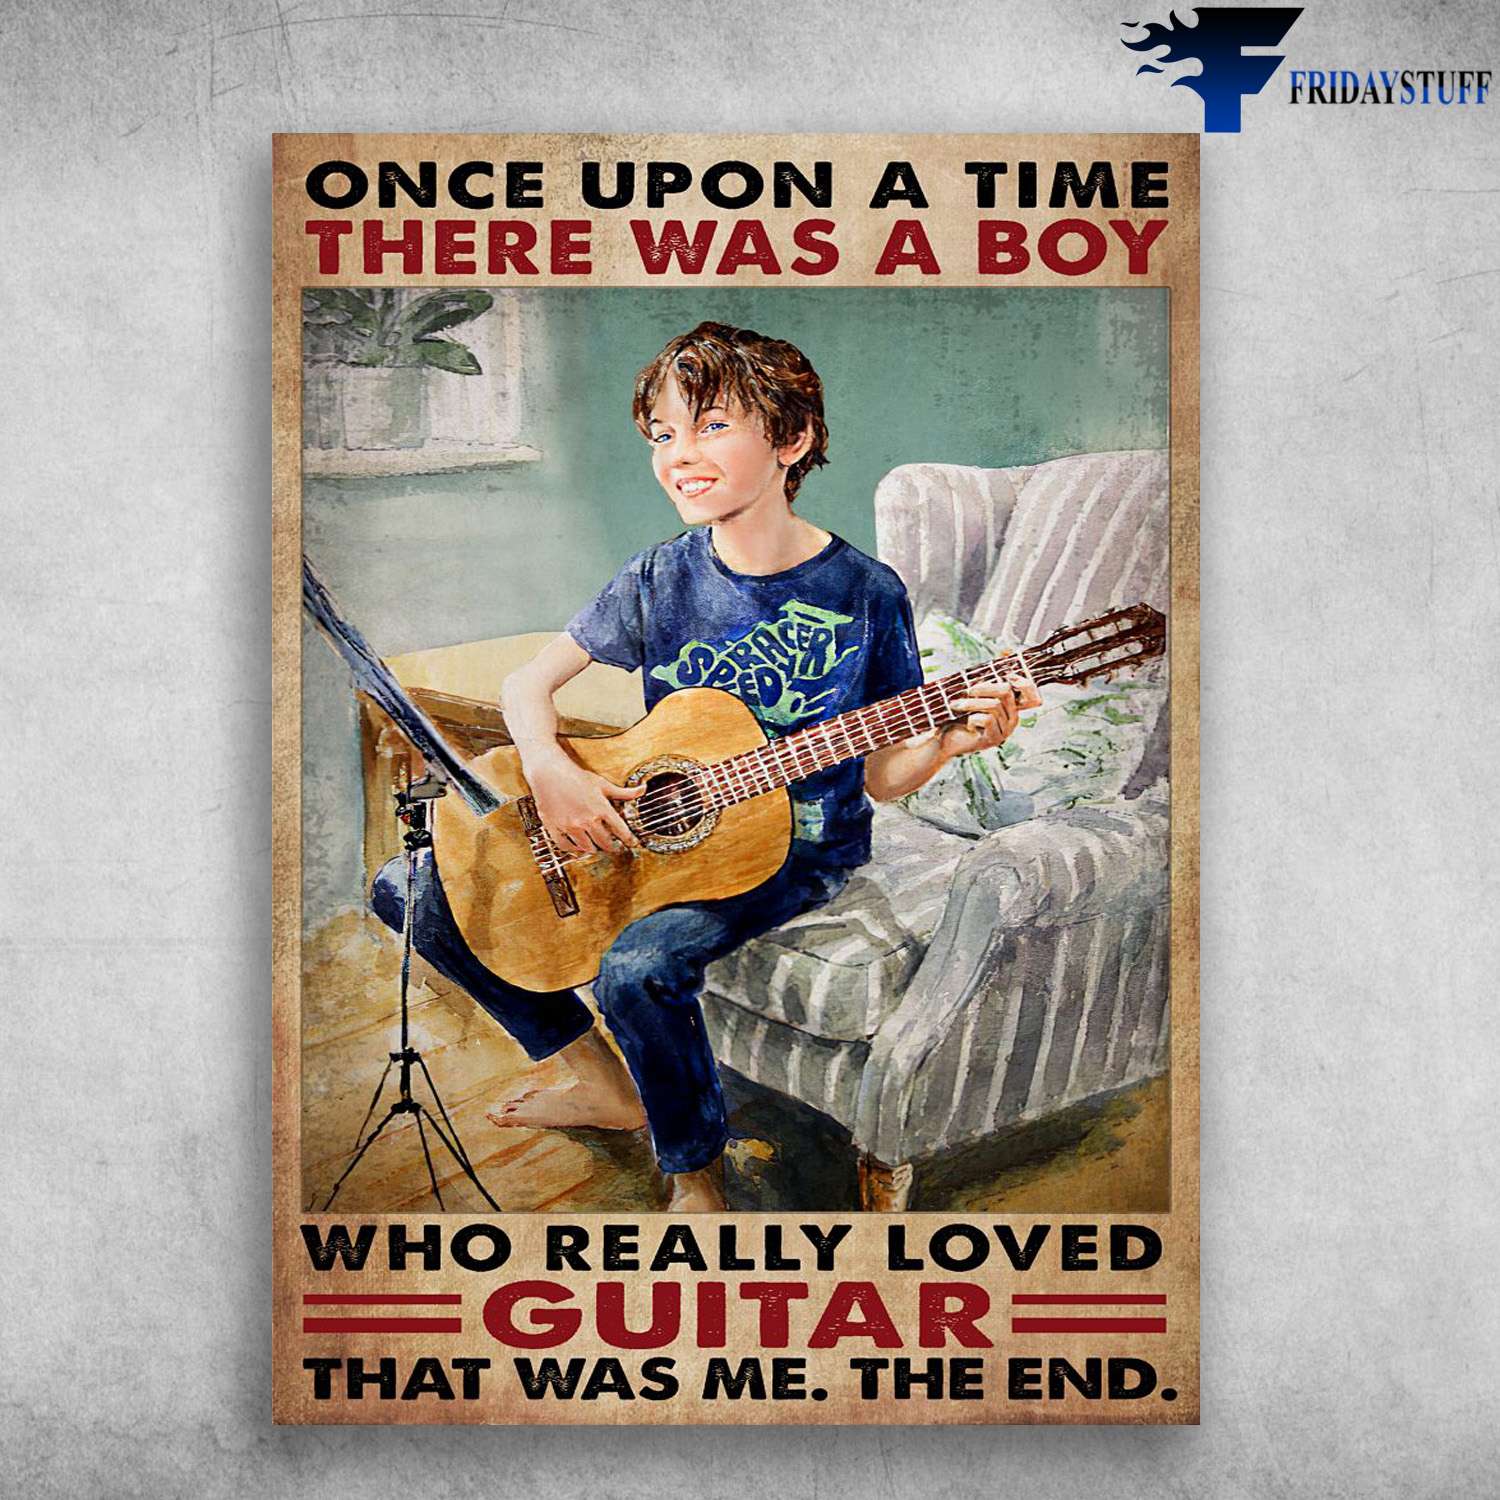 Guitar Boy – Once Upon A Time, There Was A Boy, Who Really Loved Guitar, That Was Me, The End